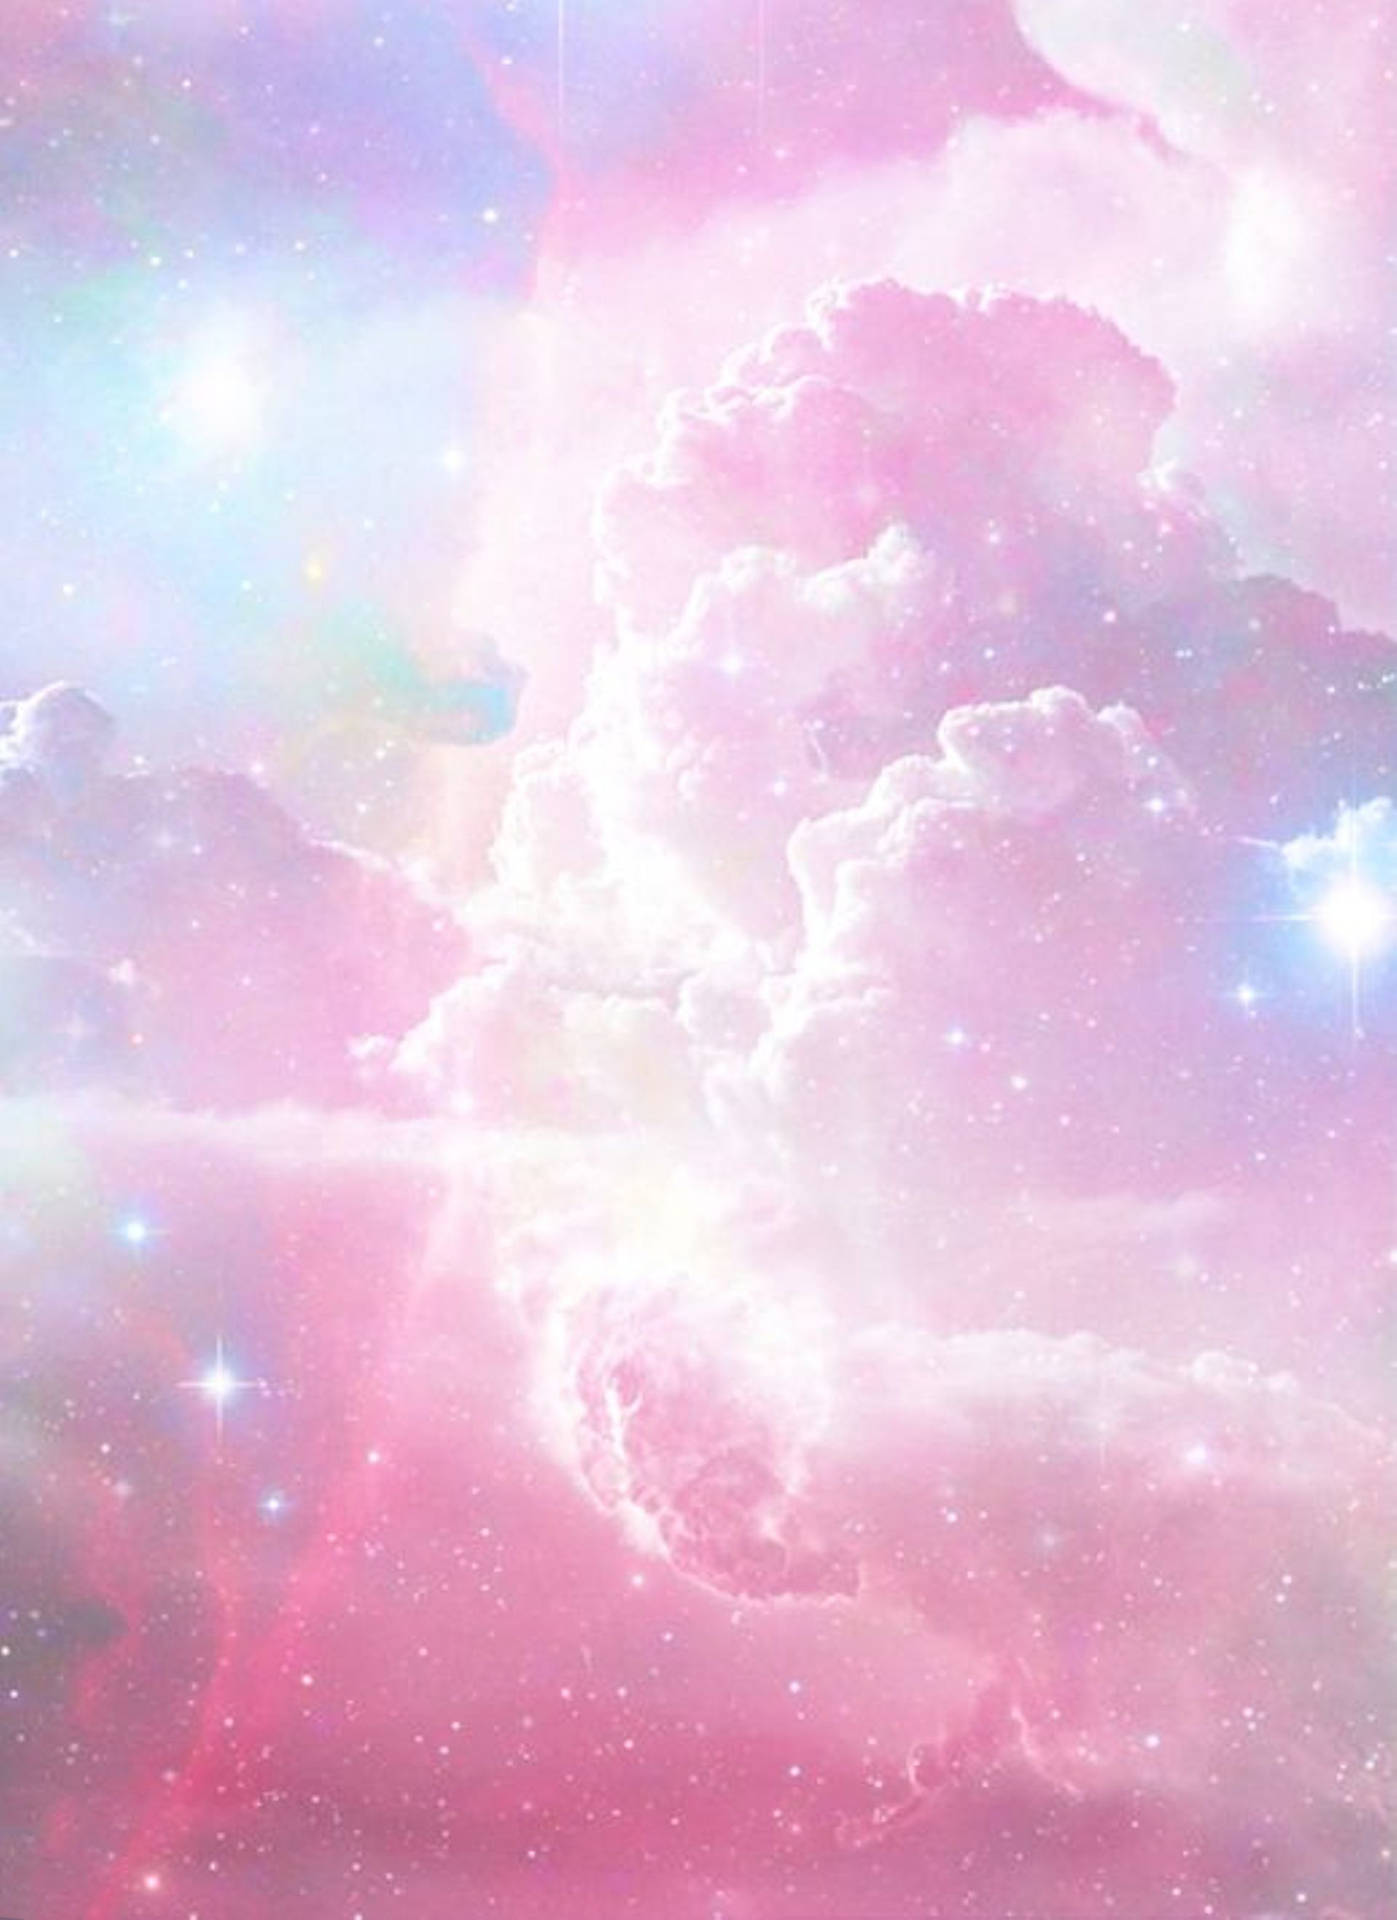 Download Cute Pastel Colors Sparkly Clouds Wallpaper